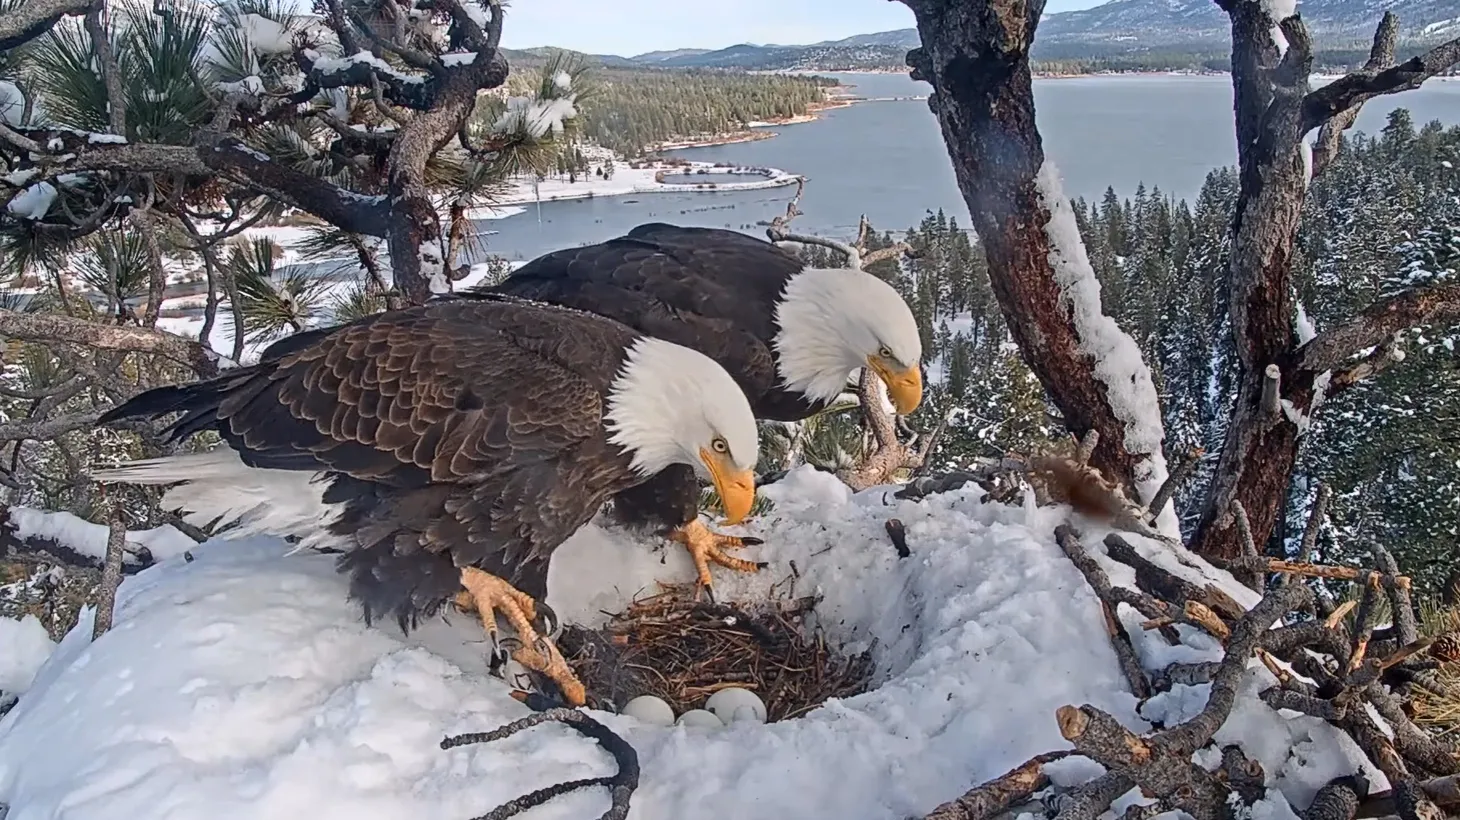 Bald eagle couple Jackie and Shadow are waiting for their three eaglets to hatch. Tens of thousands of bird enthusiasts are following the journey via livestream.